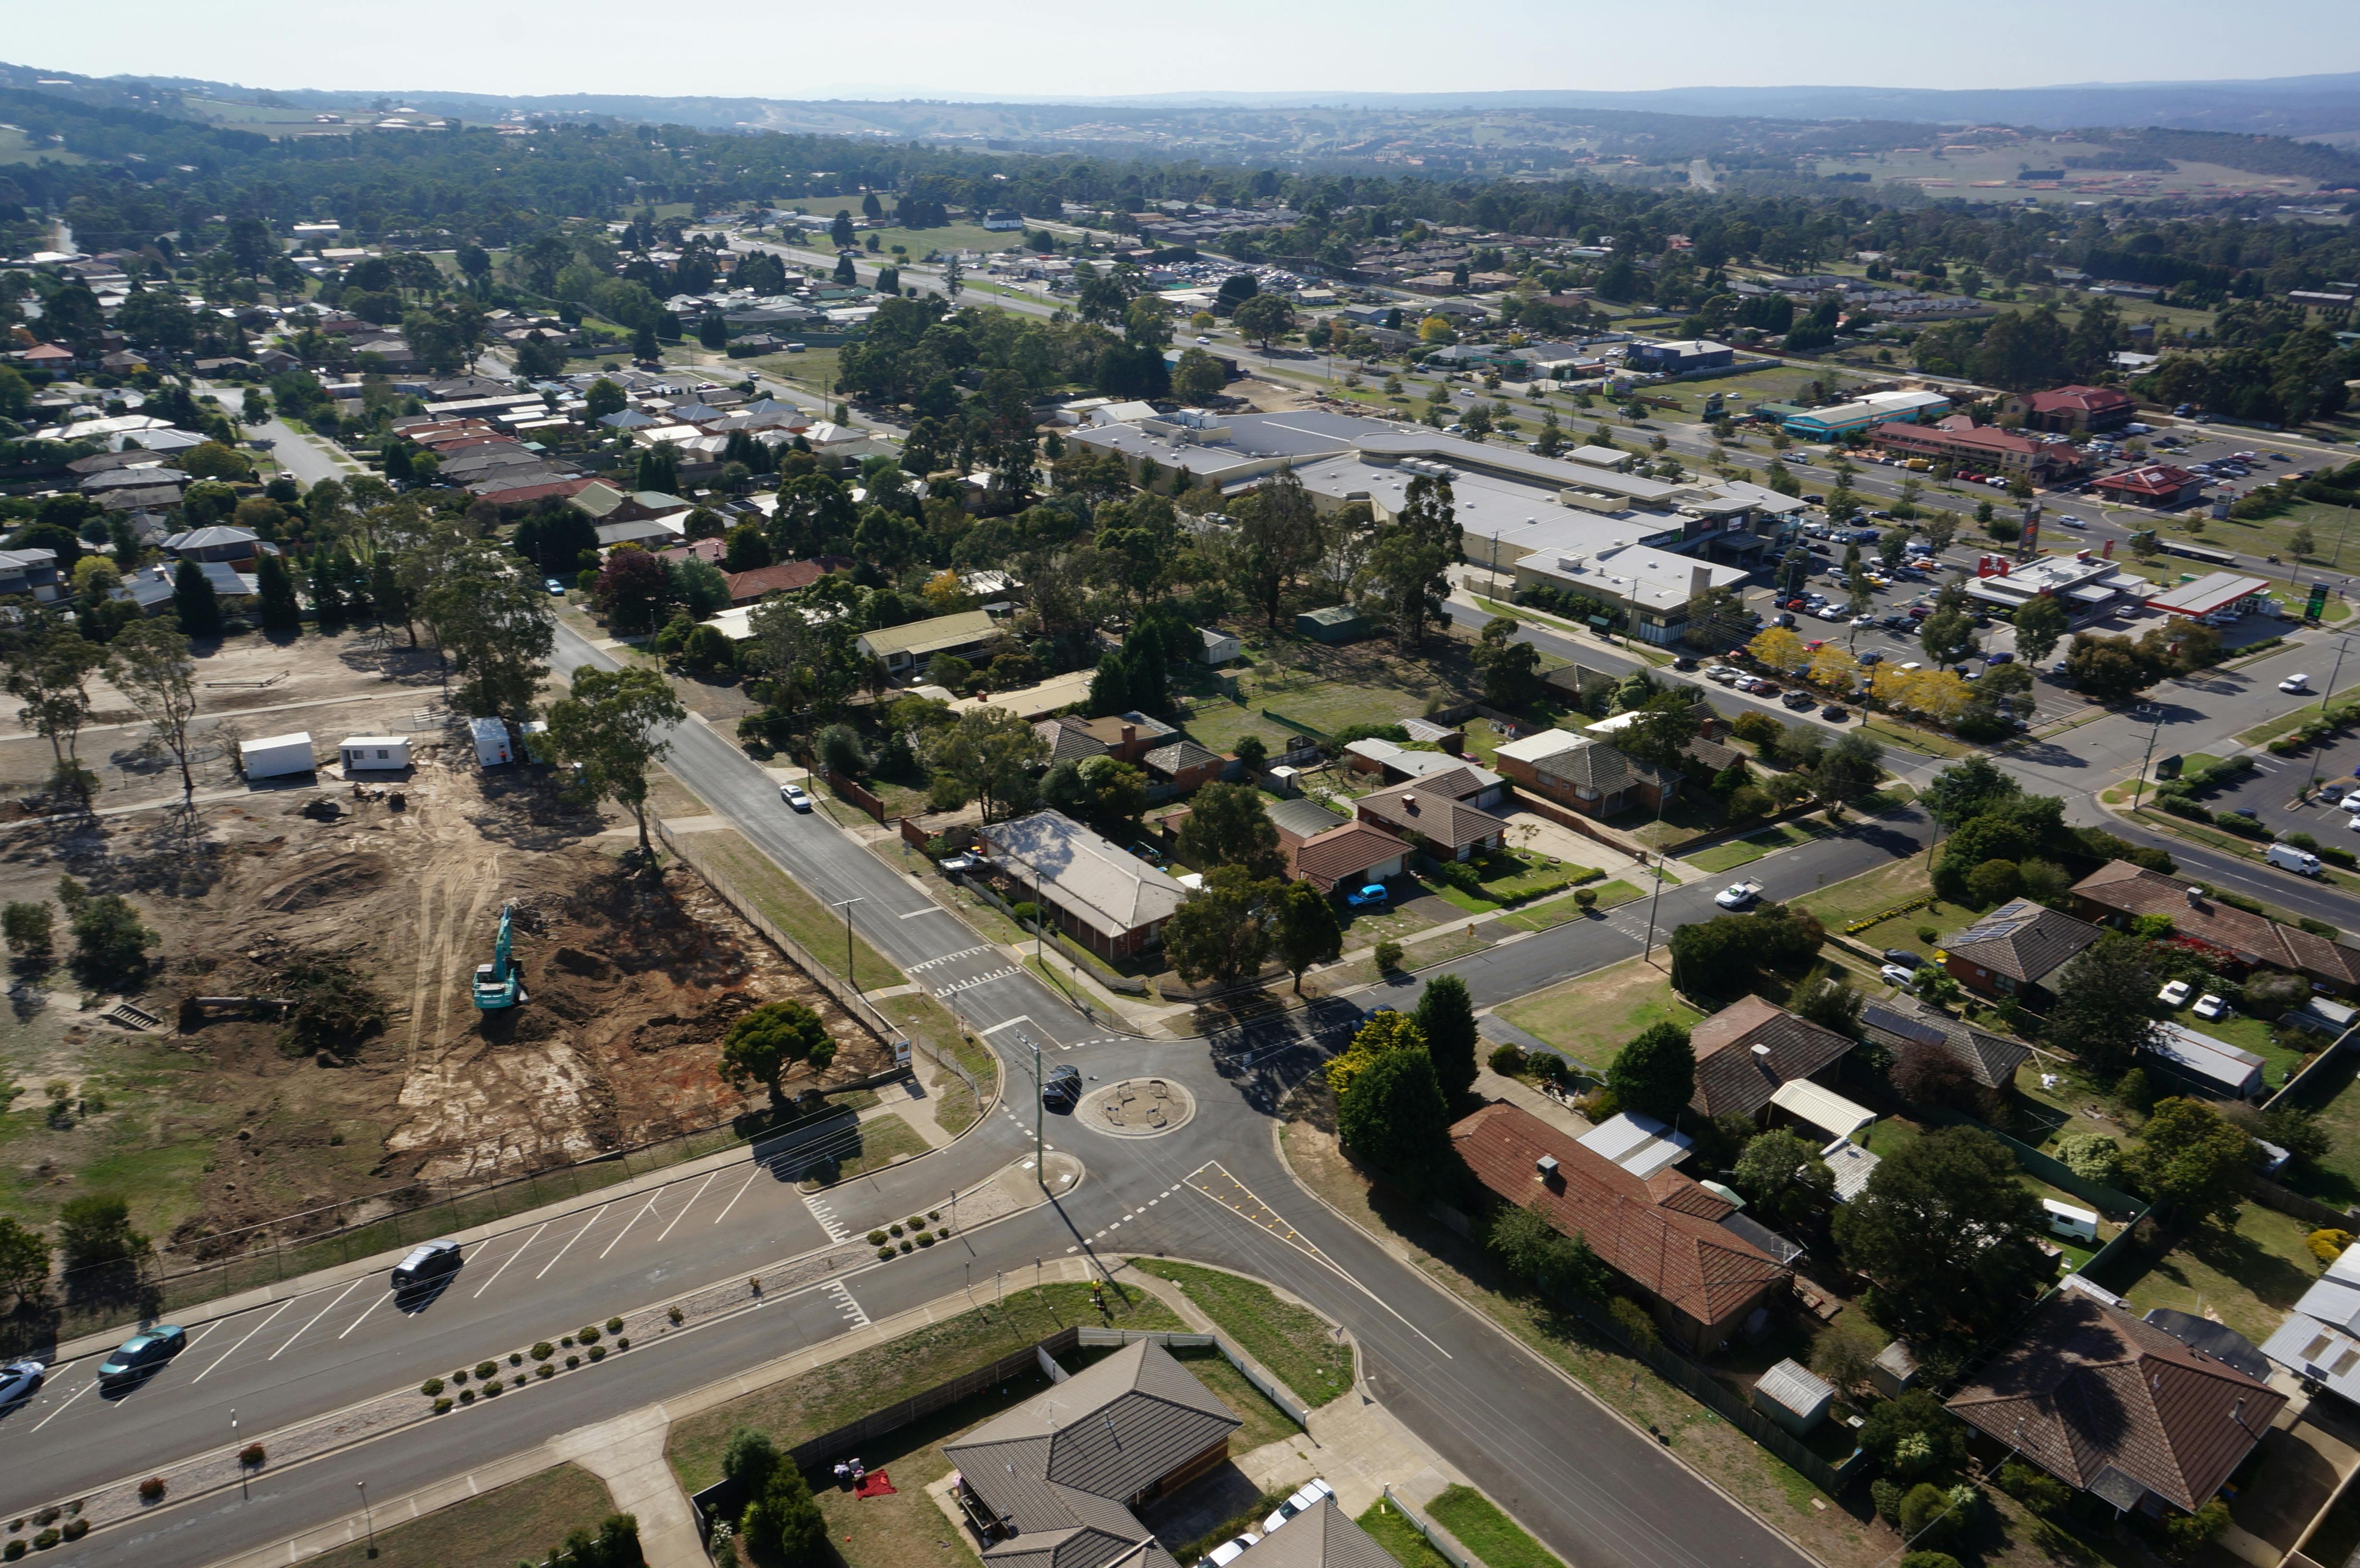 Wallan from above